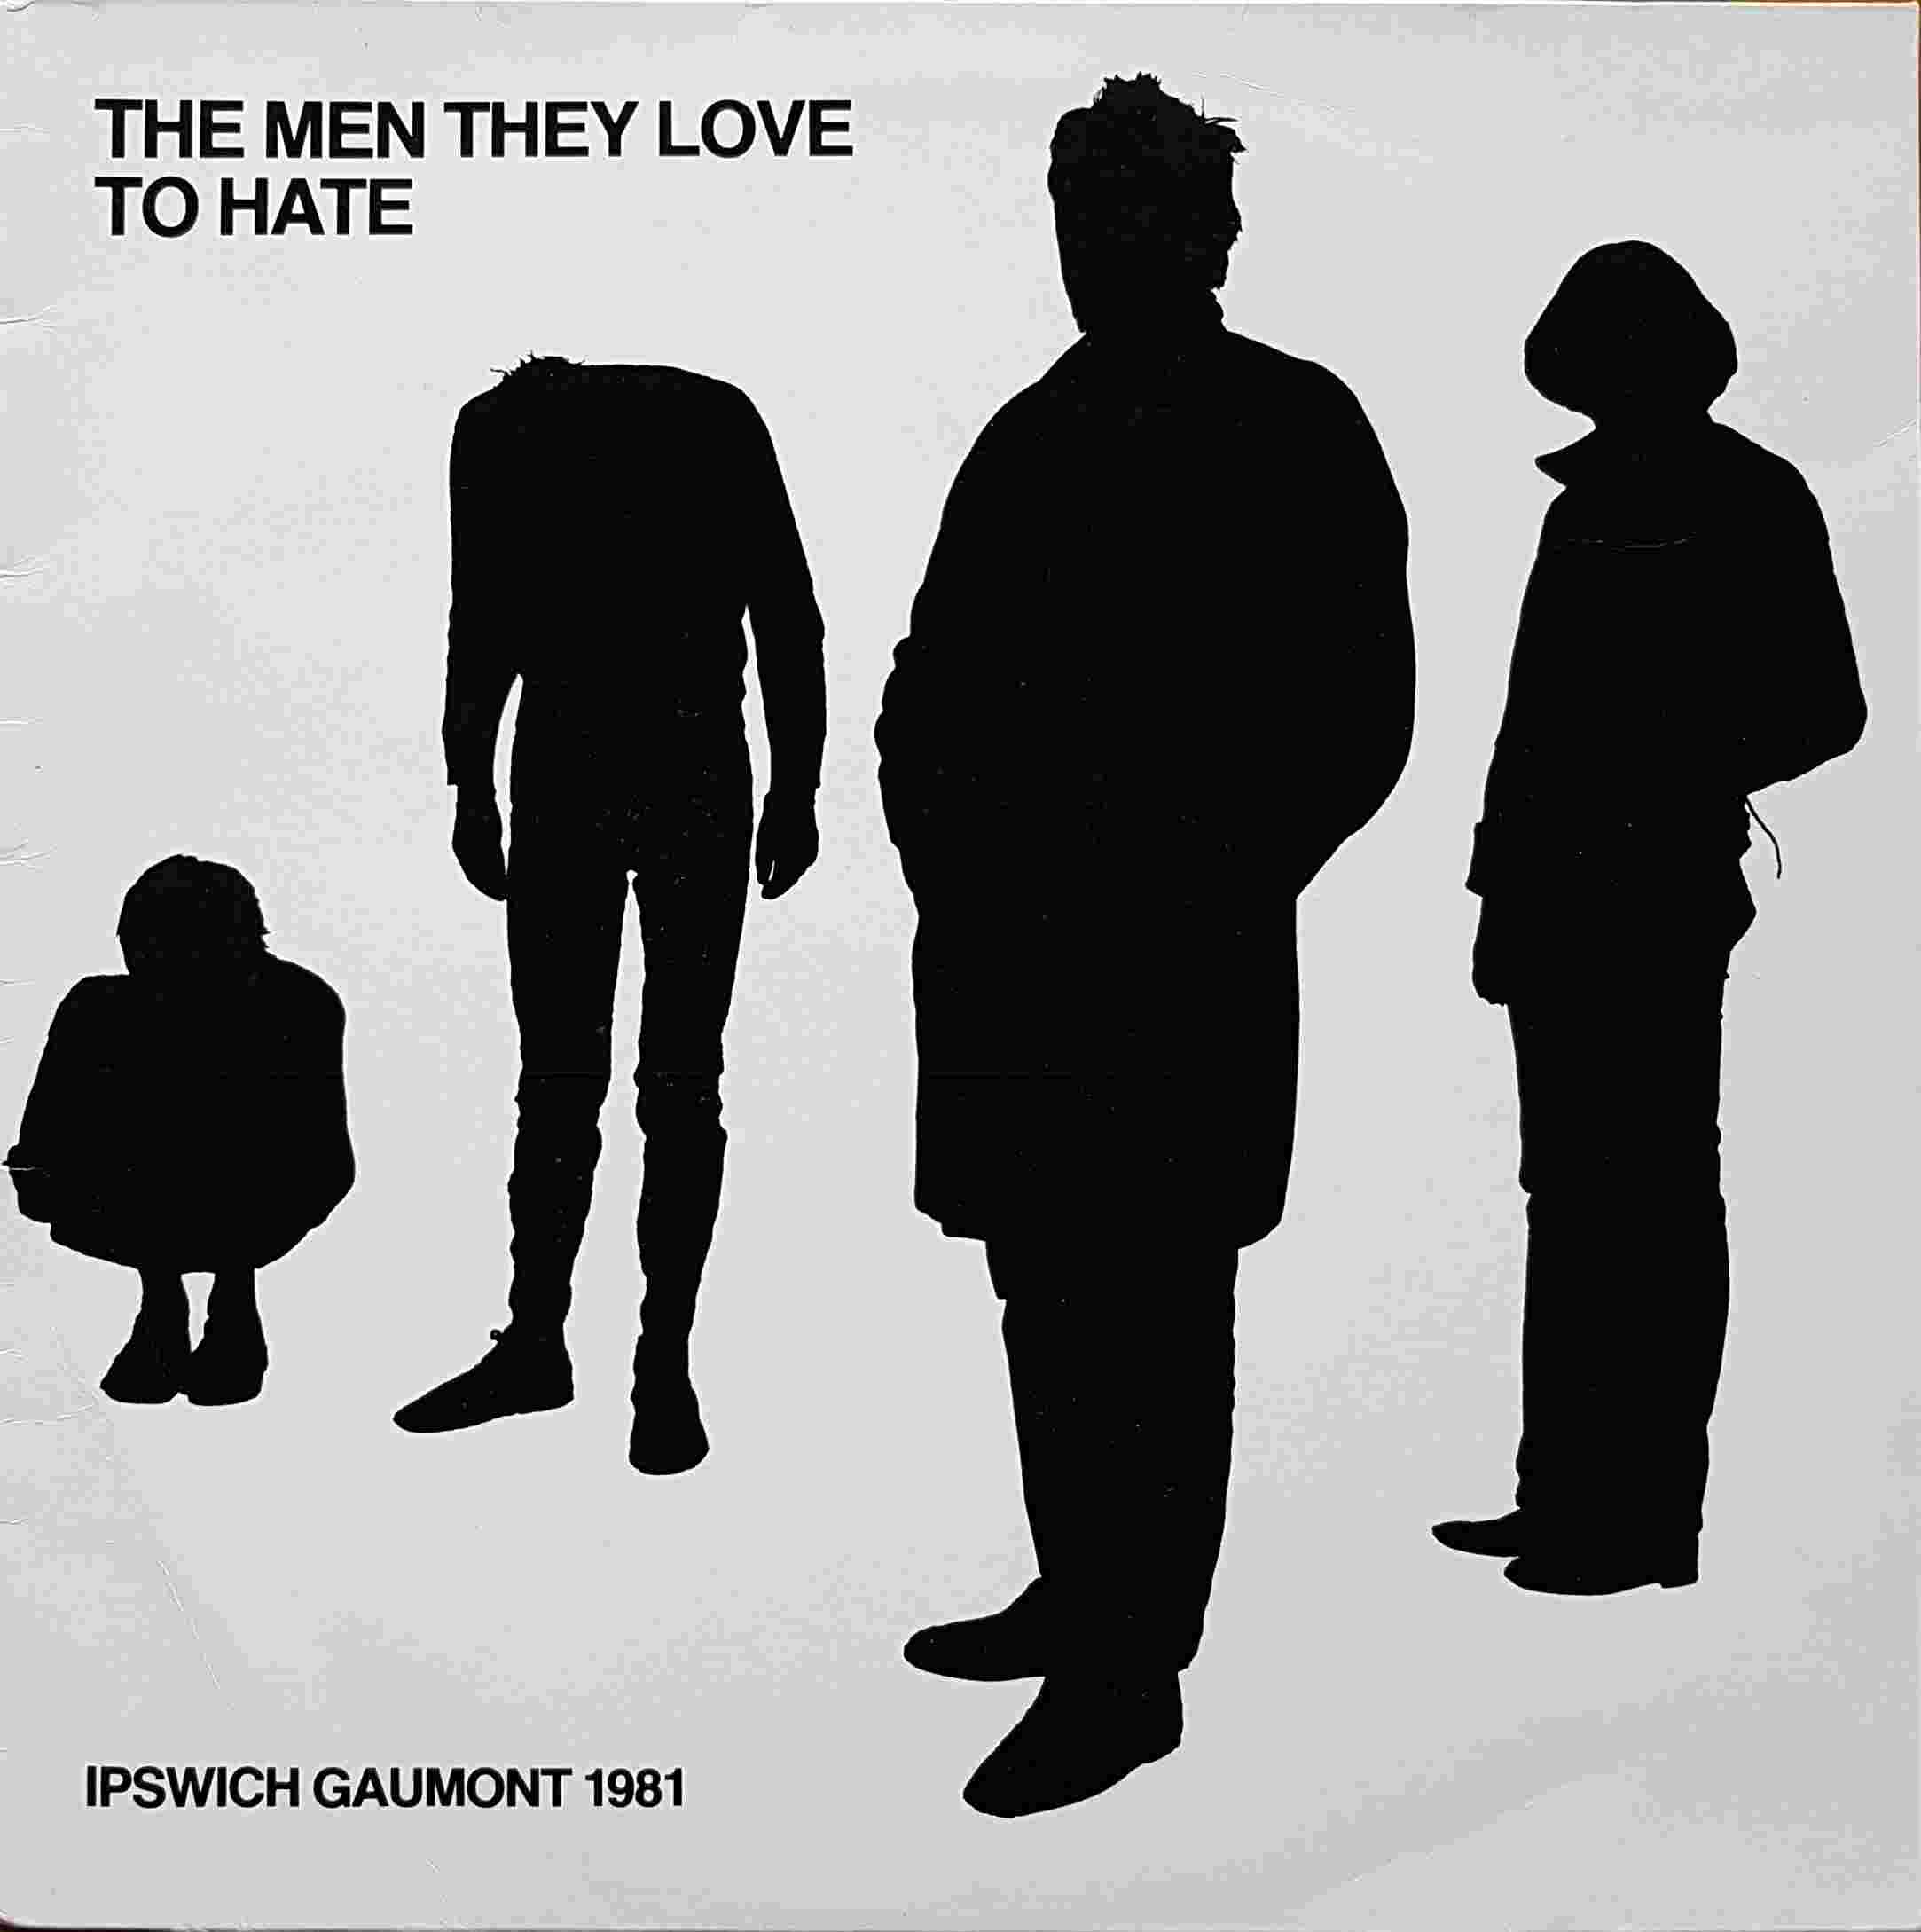 Picture of ACME 004 The men they love to hate - Live at Ipswich 1981 by artist The Stranglers 